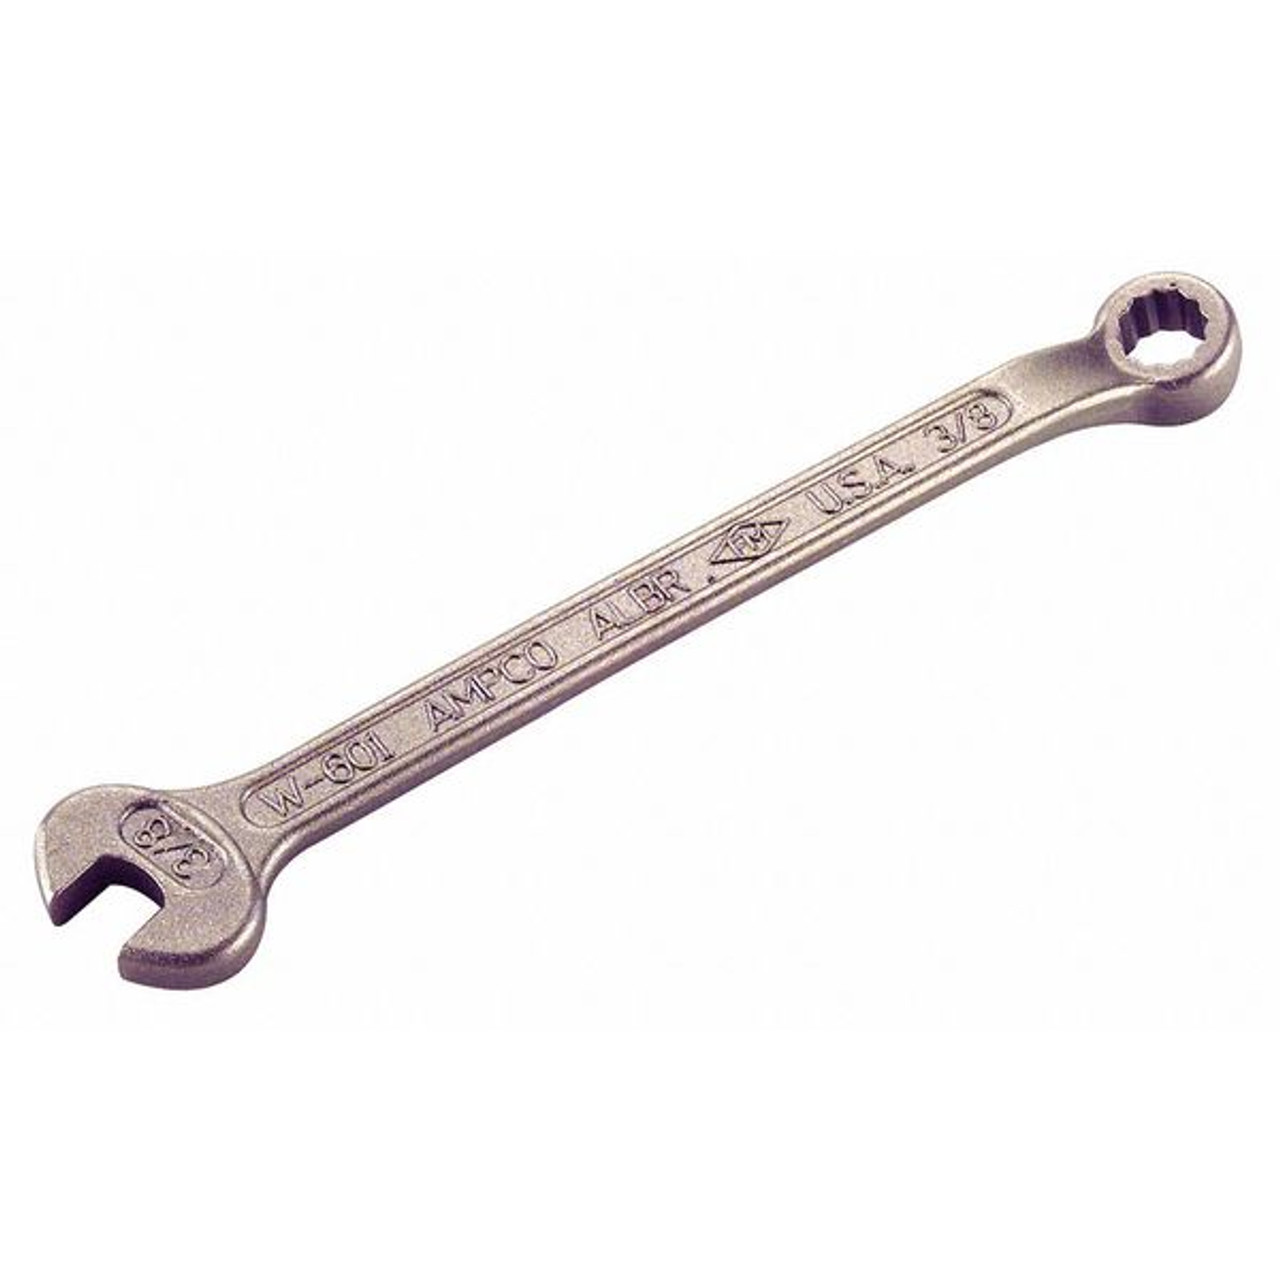 Ampco Safety Tools WS-52 12 Point Box Strike Wrench， Non-Sparking